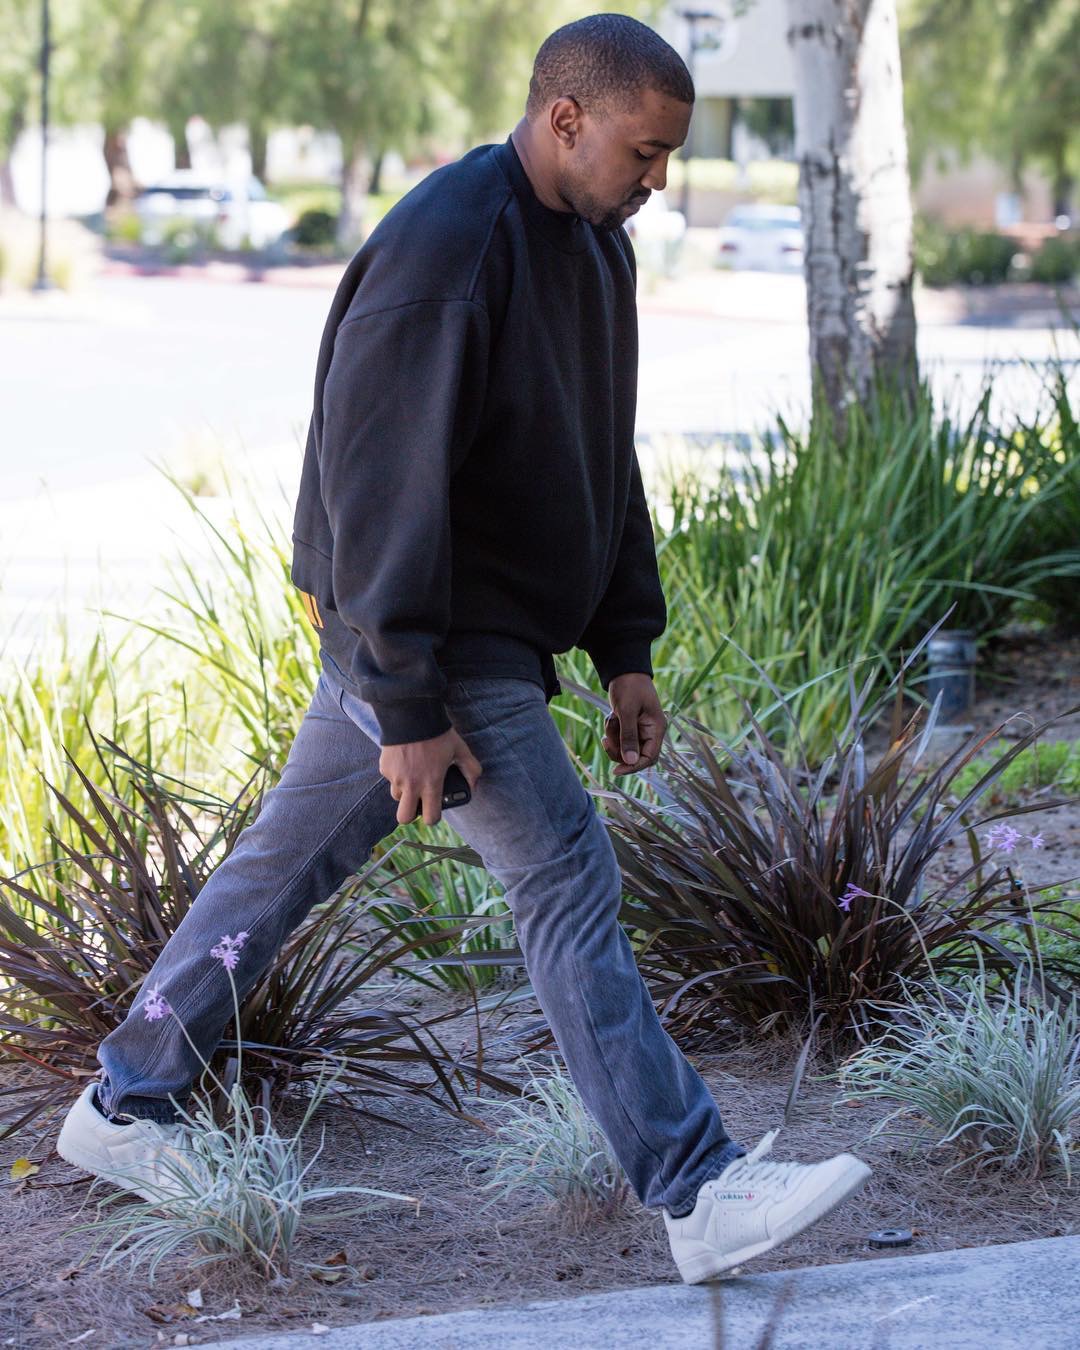 Abreviatura Correlación A rayas SPOTTED: Kanye West Wears Adidas Yeezy Calabasas Powerphase Sneakers –  PAUSE Online | Men's Fashion, Street Style, Fashion News & Streetwear